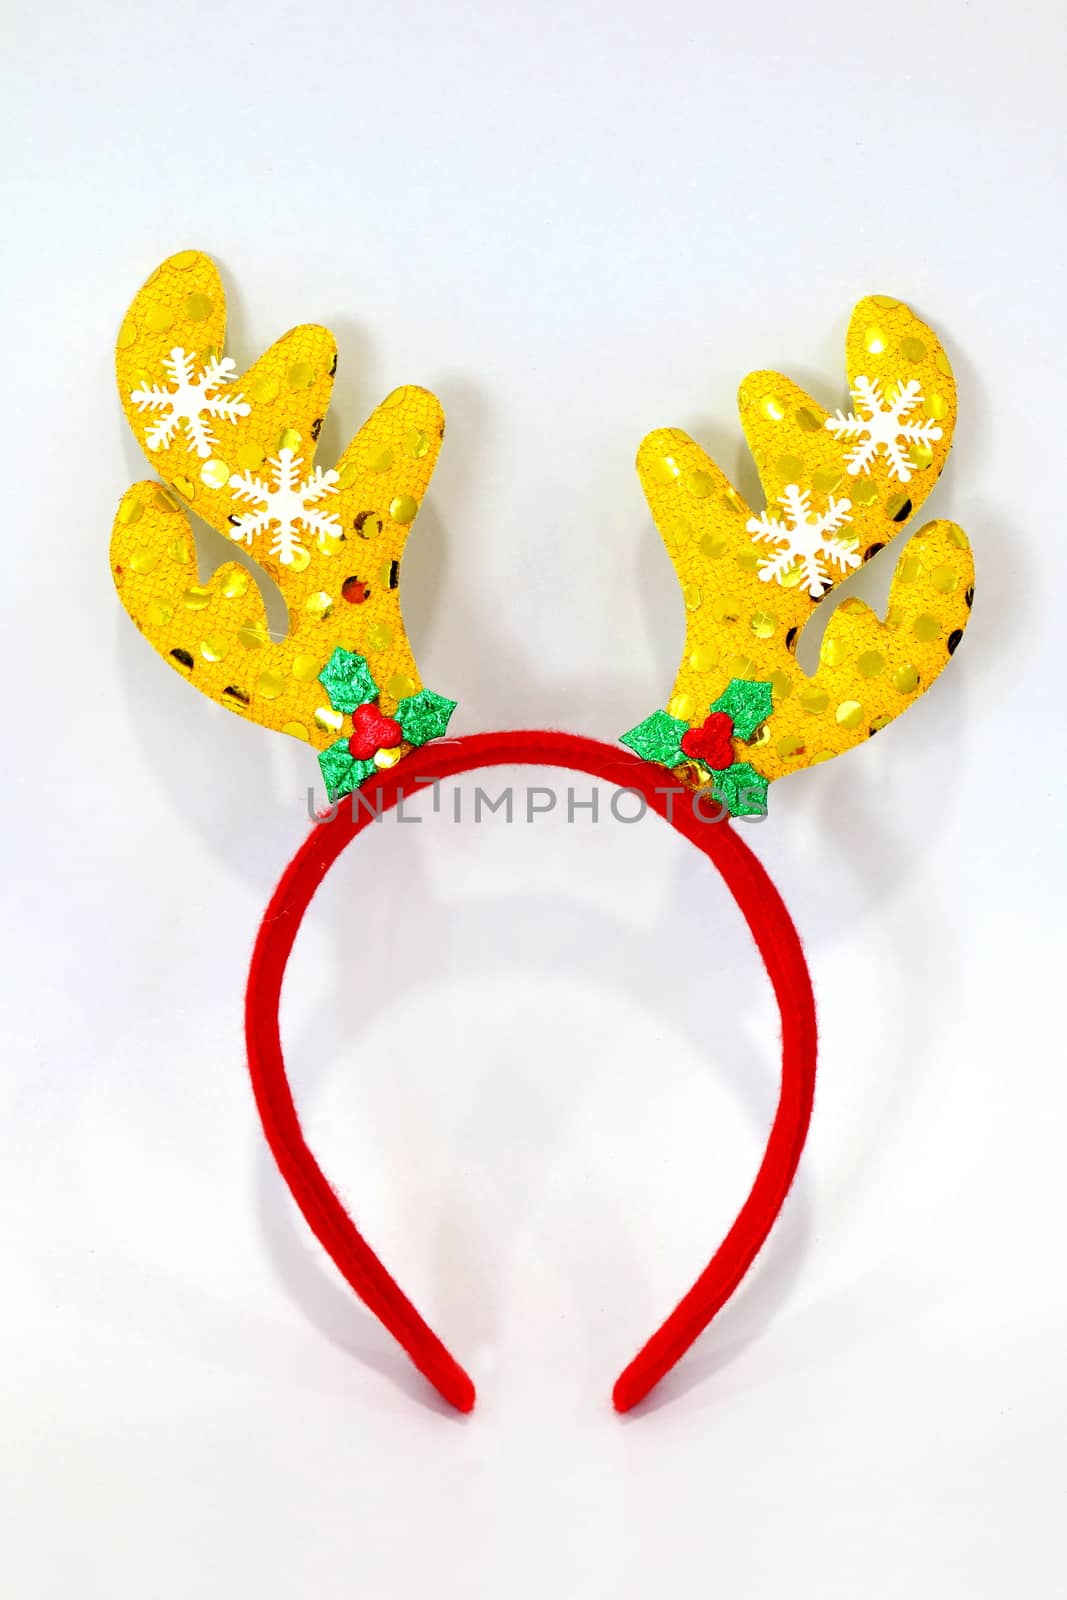 Headband Christmas, Reindeer antlers Yellow Red doll headband-hairbrush hat for festival of Christmas and new year isolated on a white background by cgdeaw